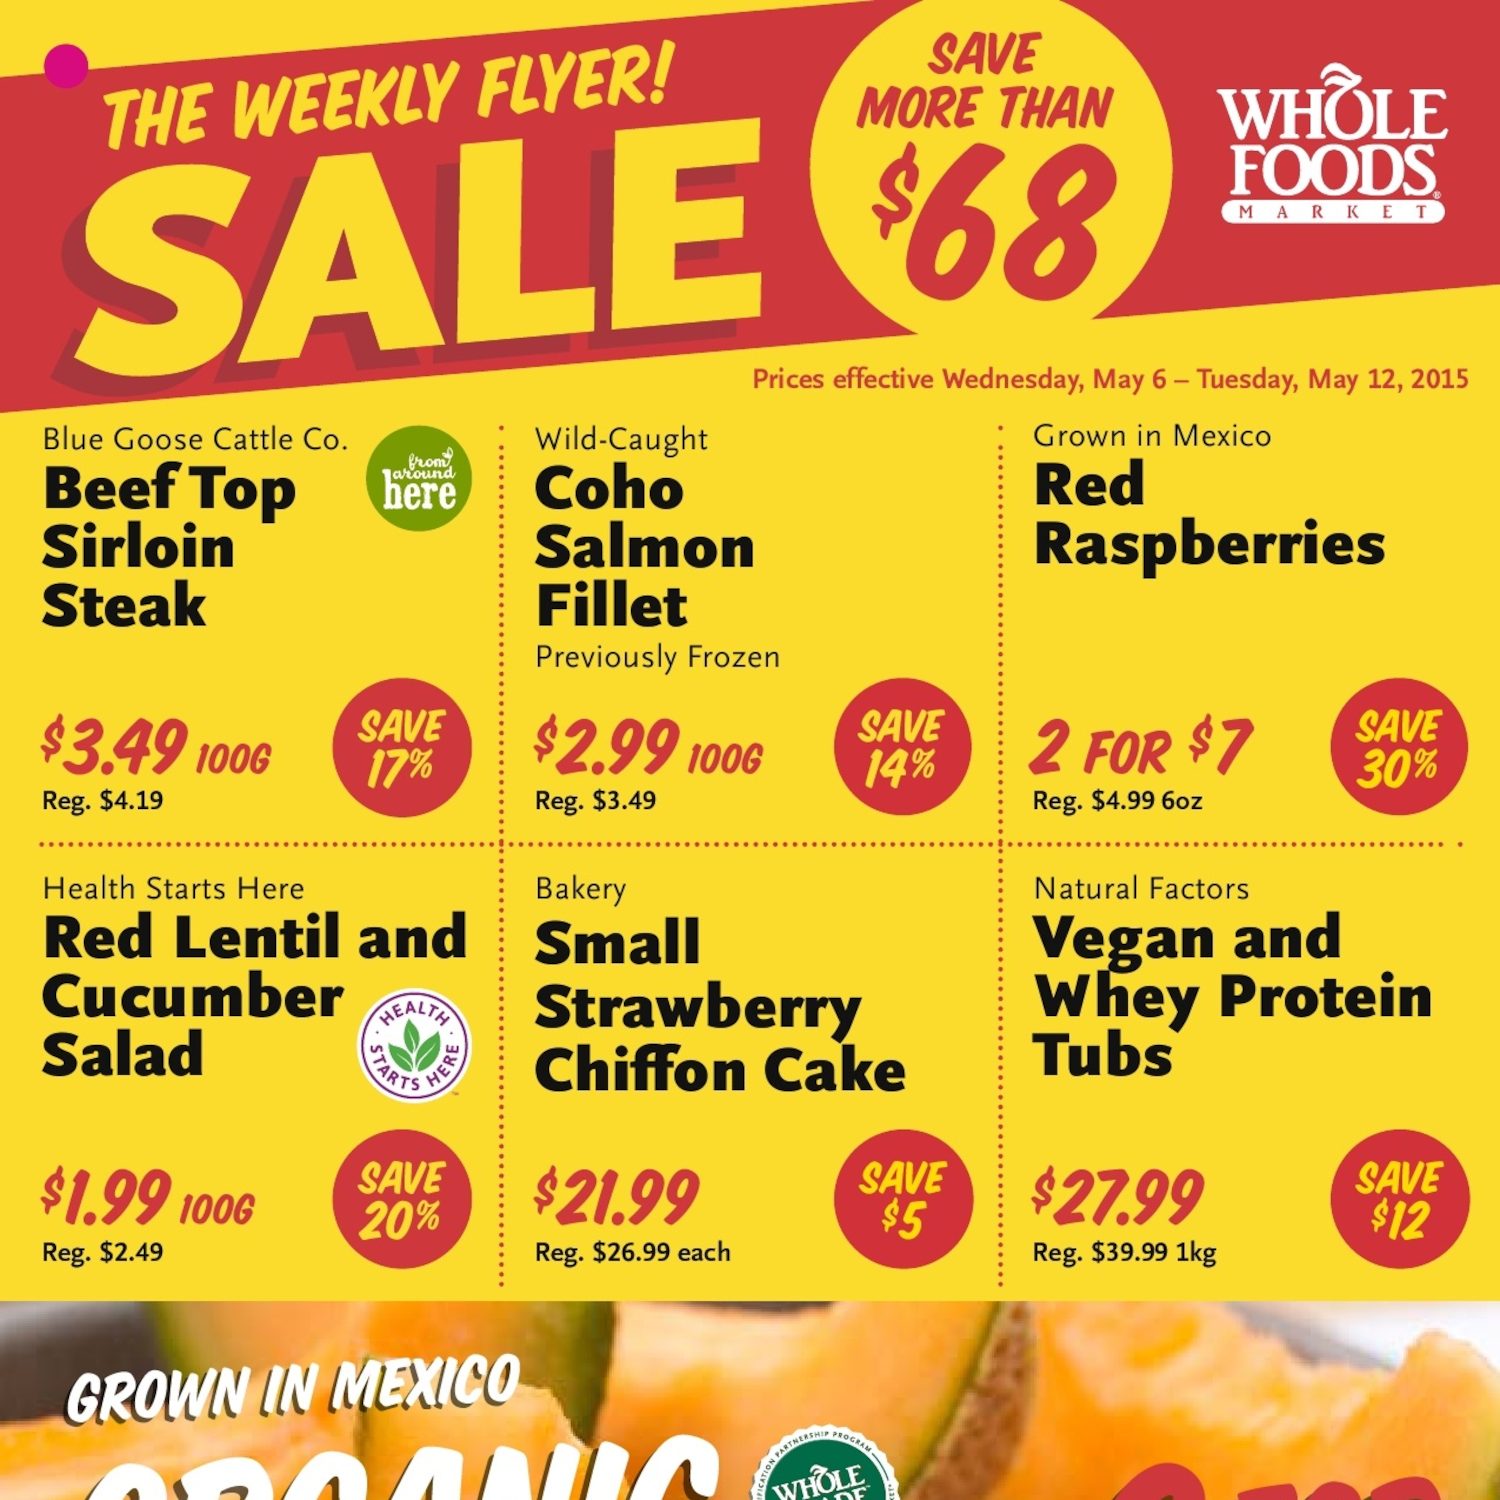 Browse through the whole foods market weekly ad preview published on 30th j...